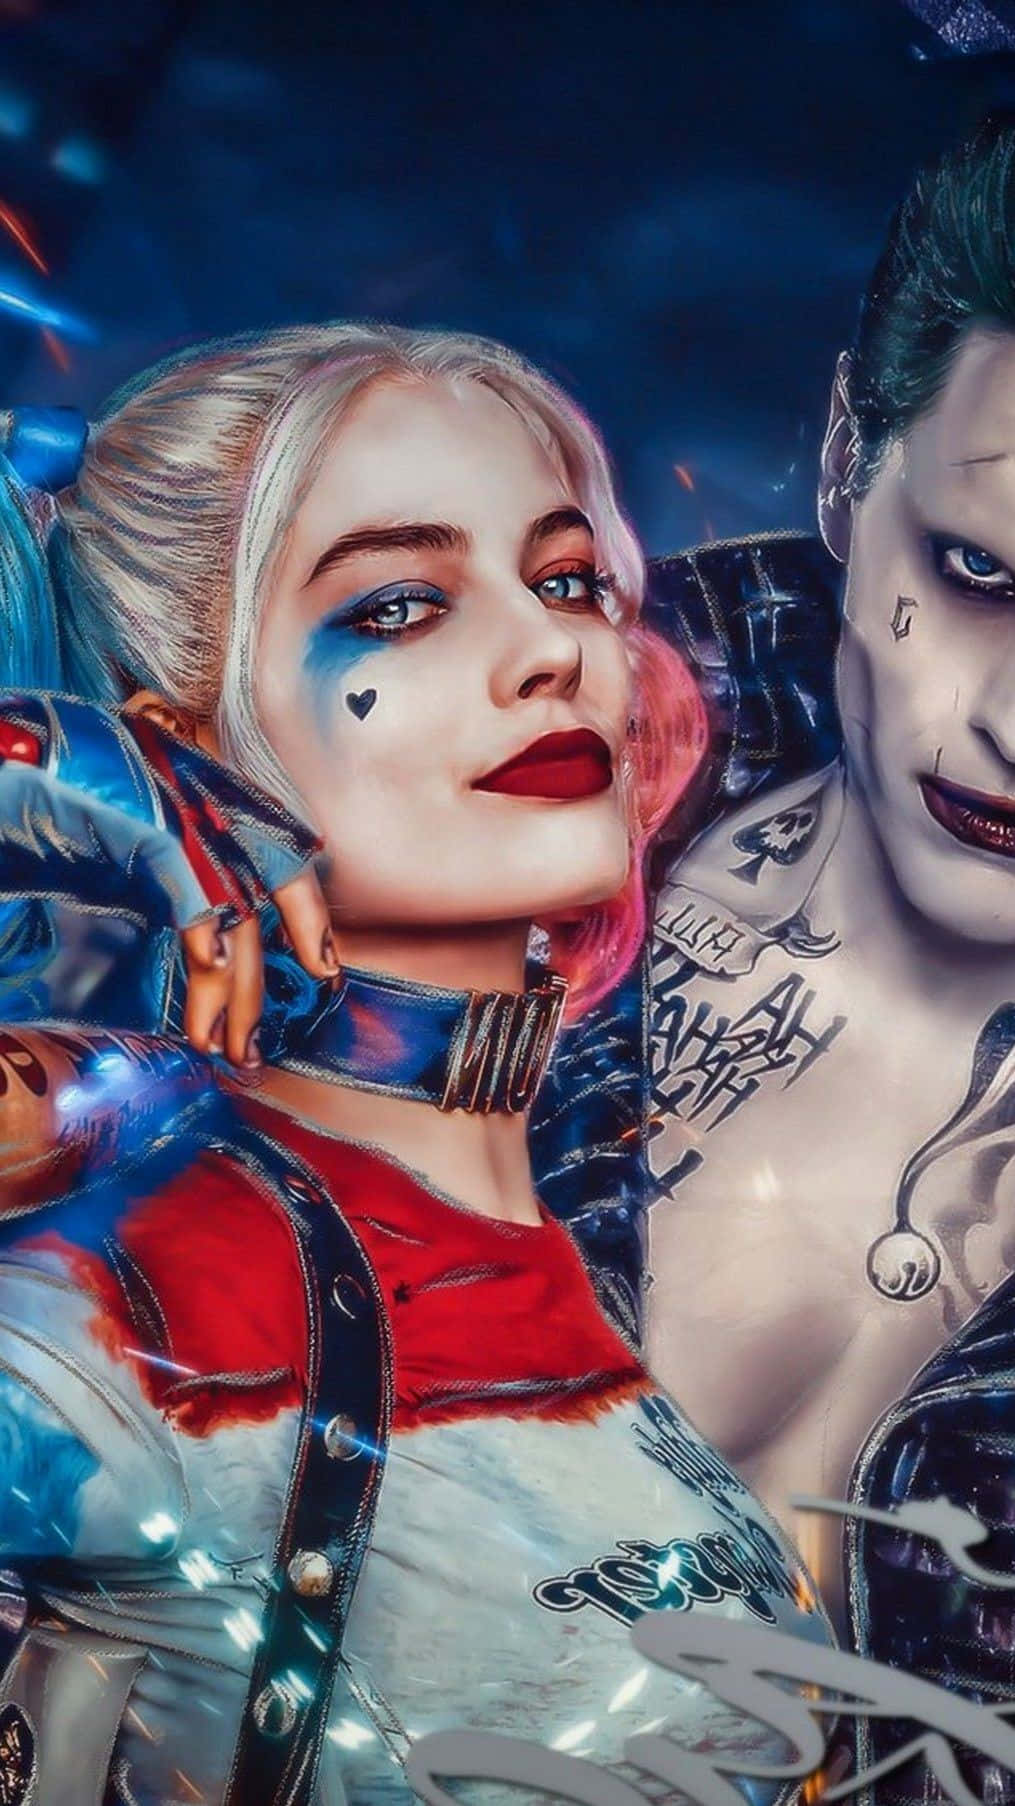 "the Joker&Harley Quinn Sealed With A Kiss" Wallpaper